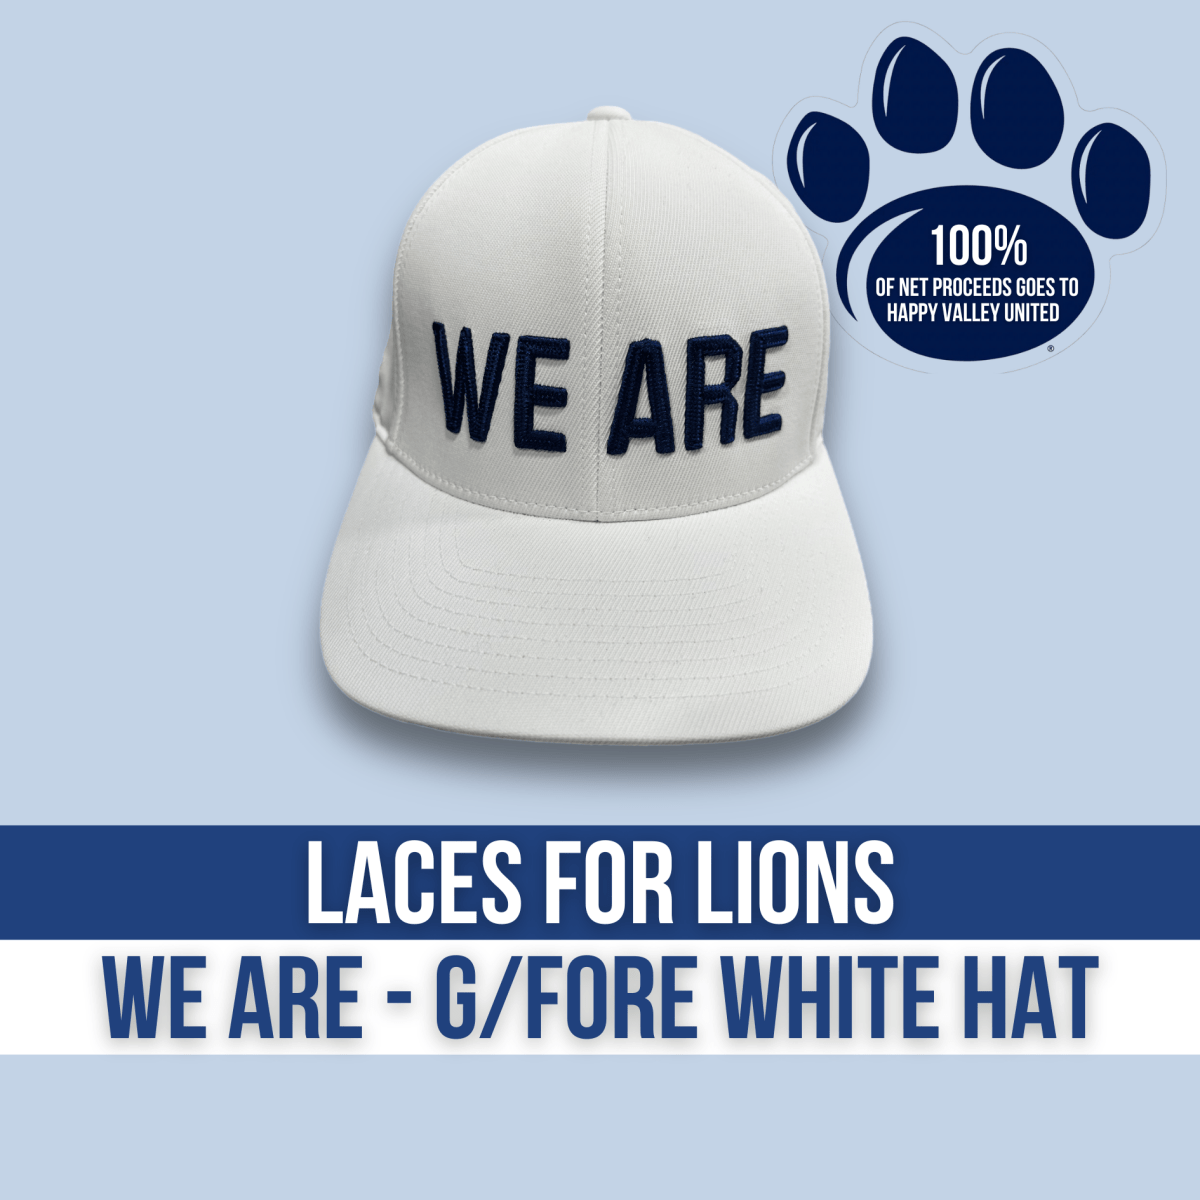 Laces for Lions White "WE ARE" Happy Valley United G/FORE 110 Hat - Hats - Jawns on Fire Sneakers & Streetwear